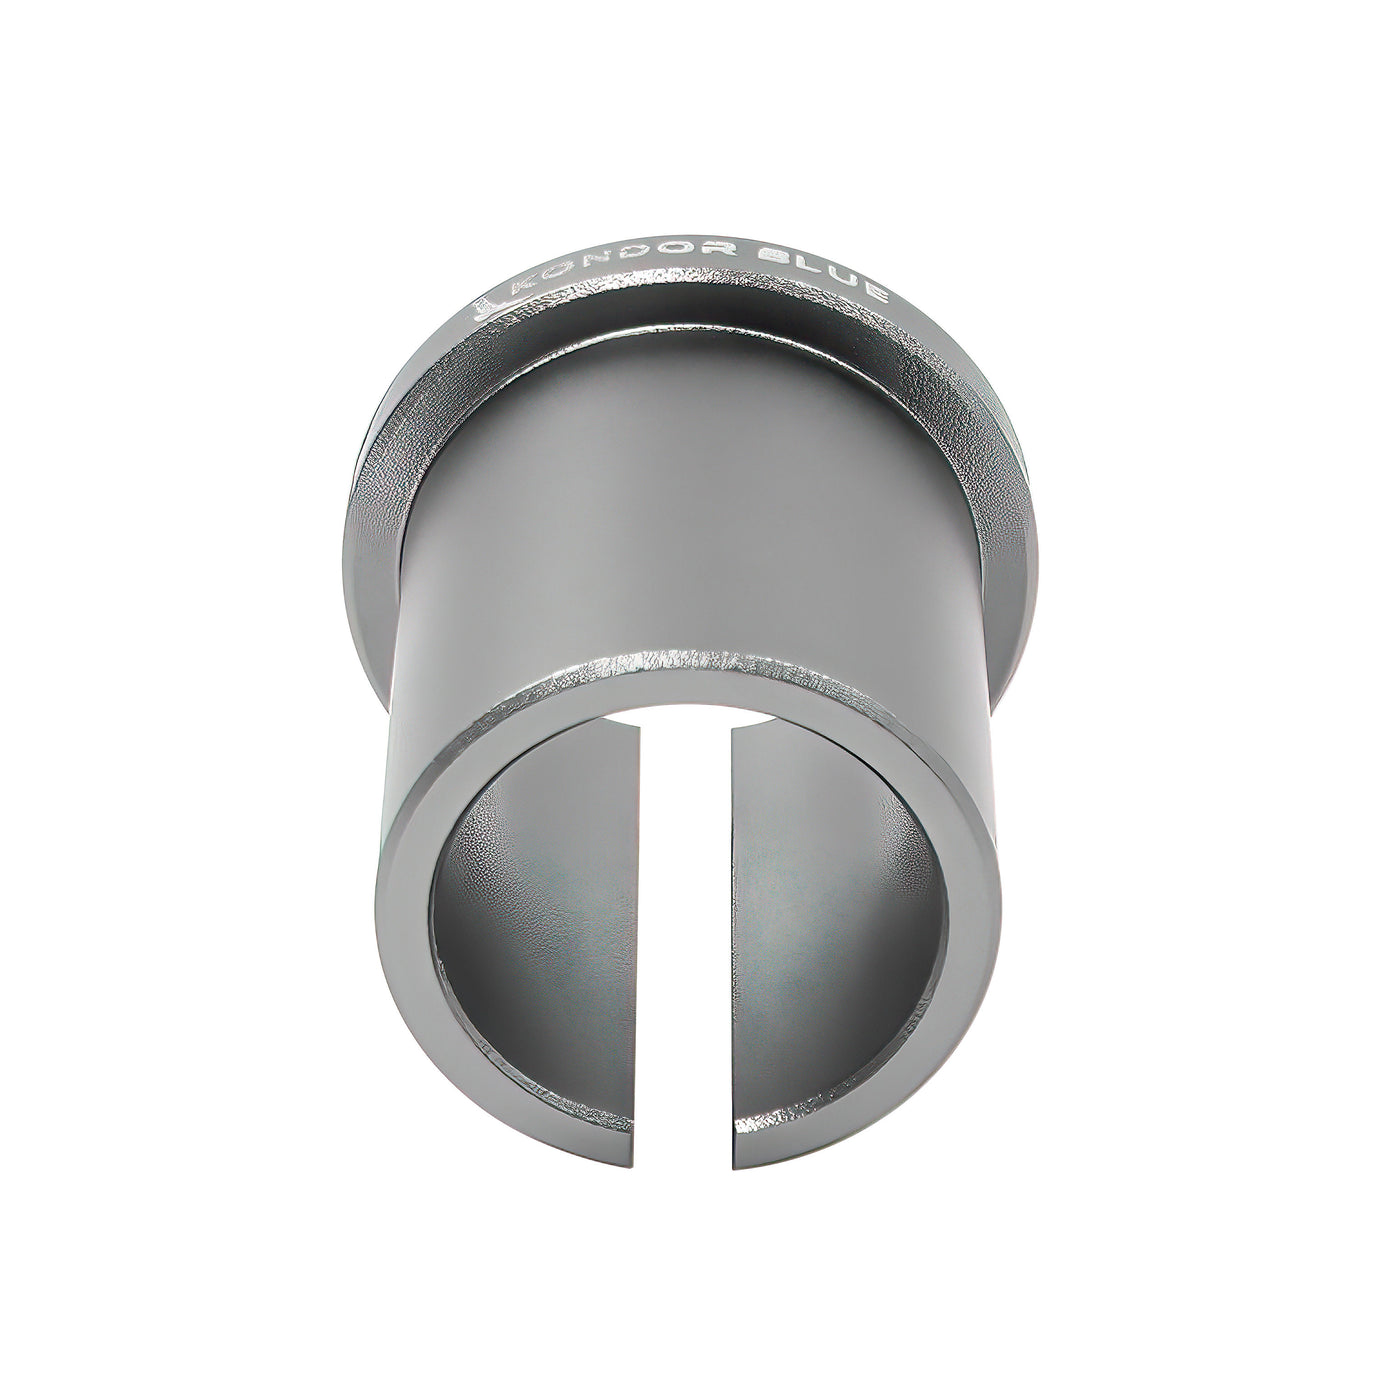 15mm to 19mm Rod Adapter Bushing